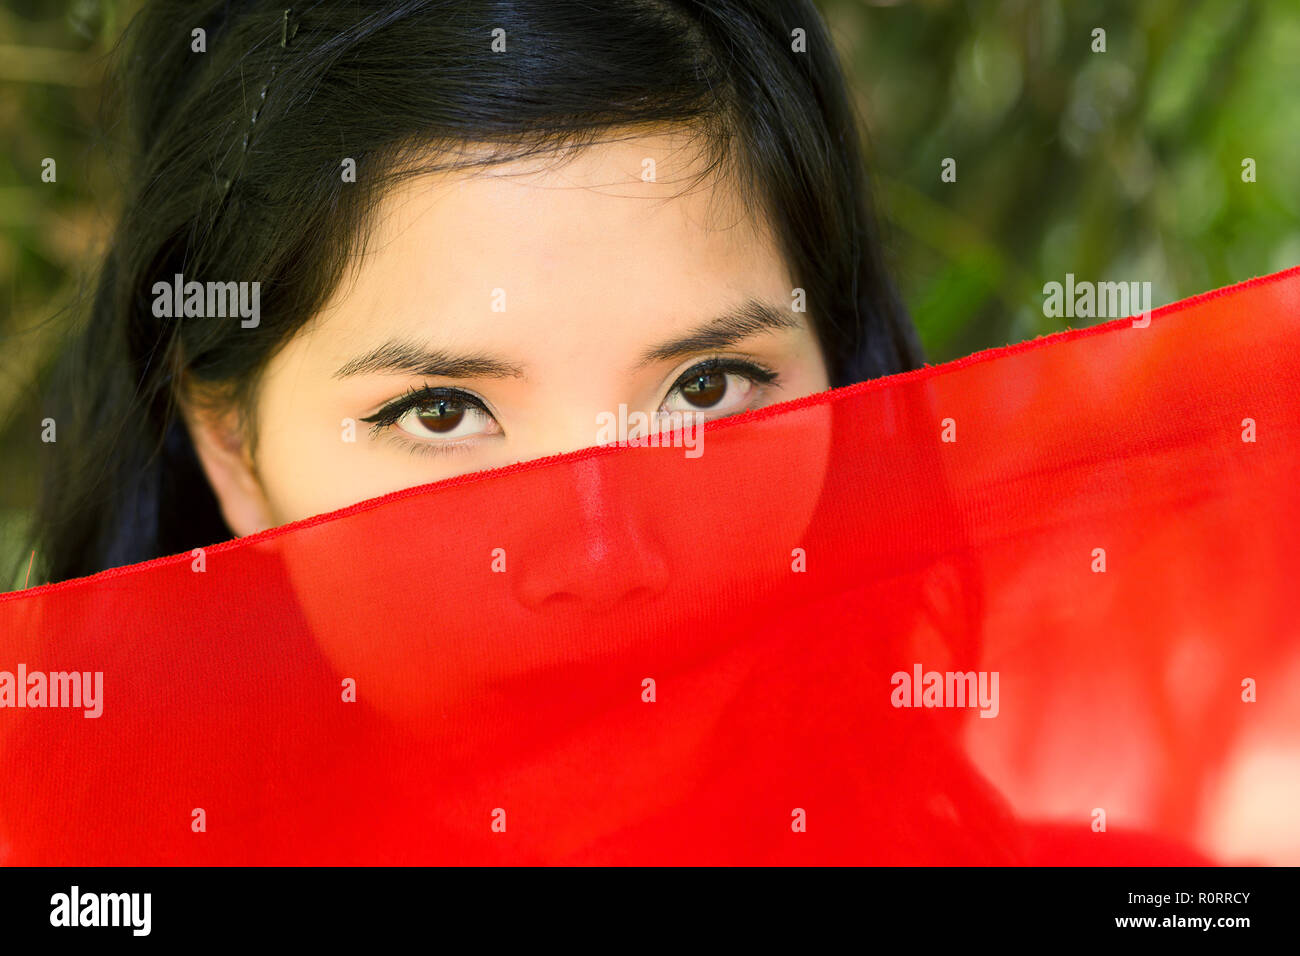 vietnamese woman peeking over red fabric at the camera so that just her eyes are visible, serious expression Stock Photo